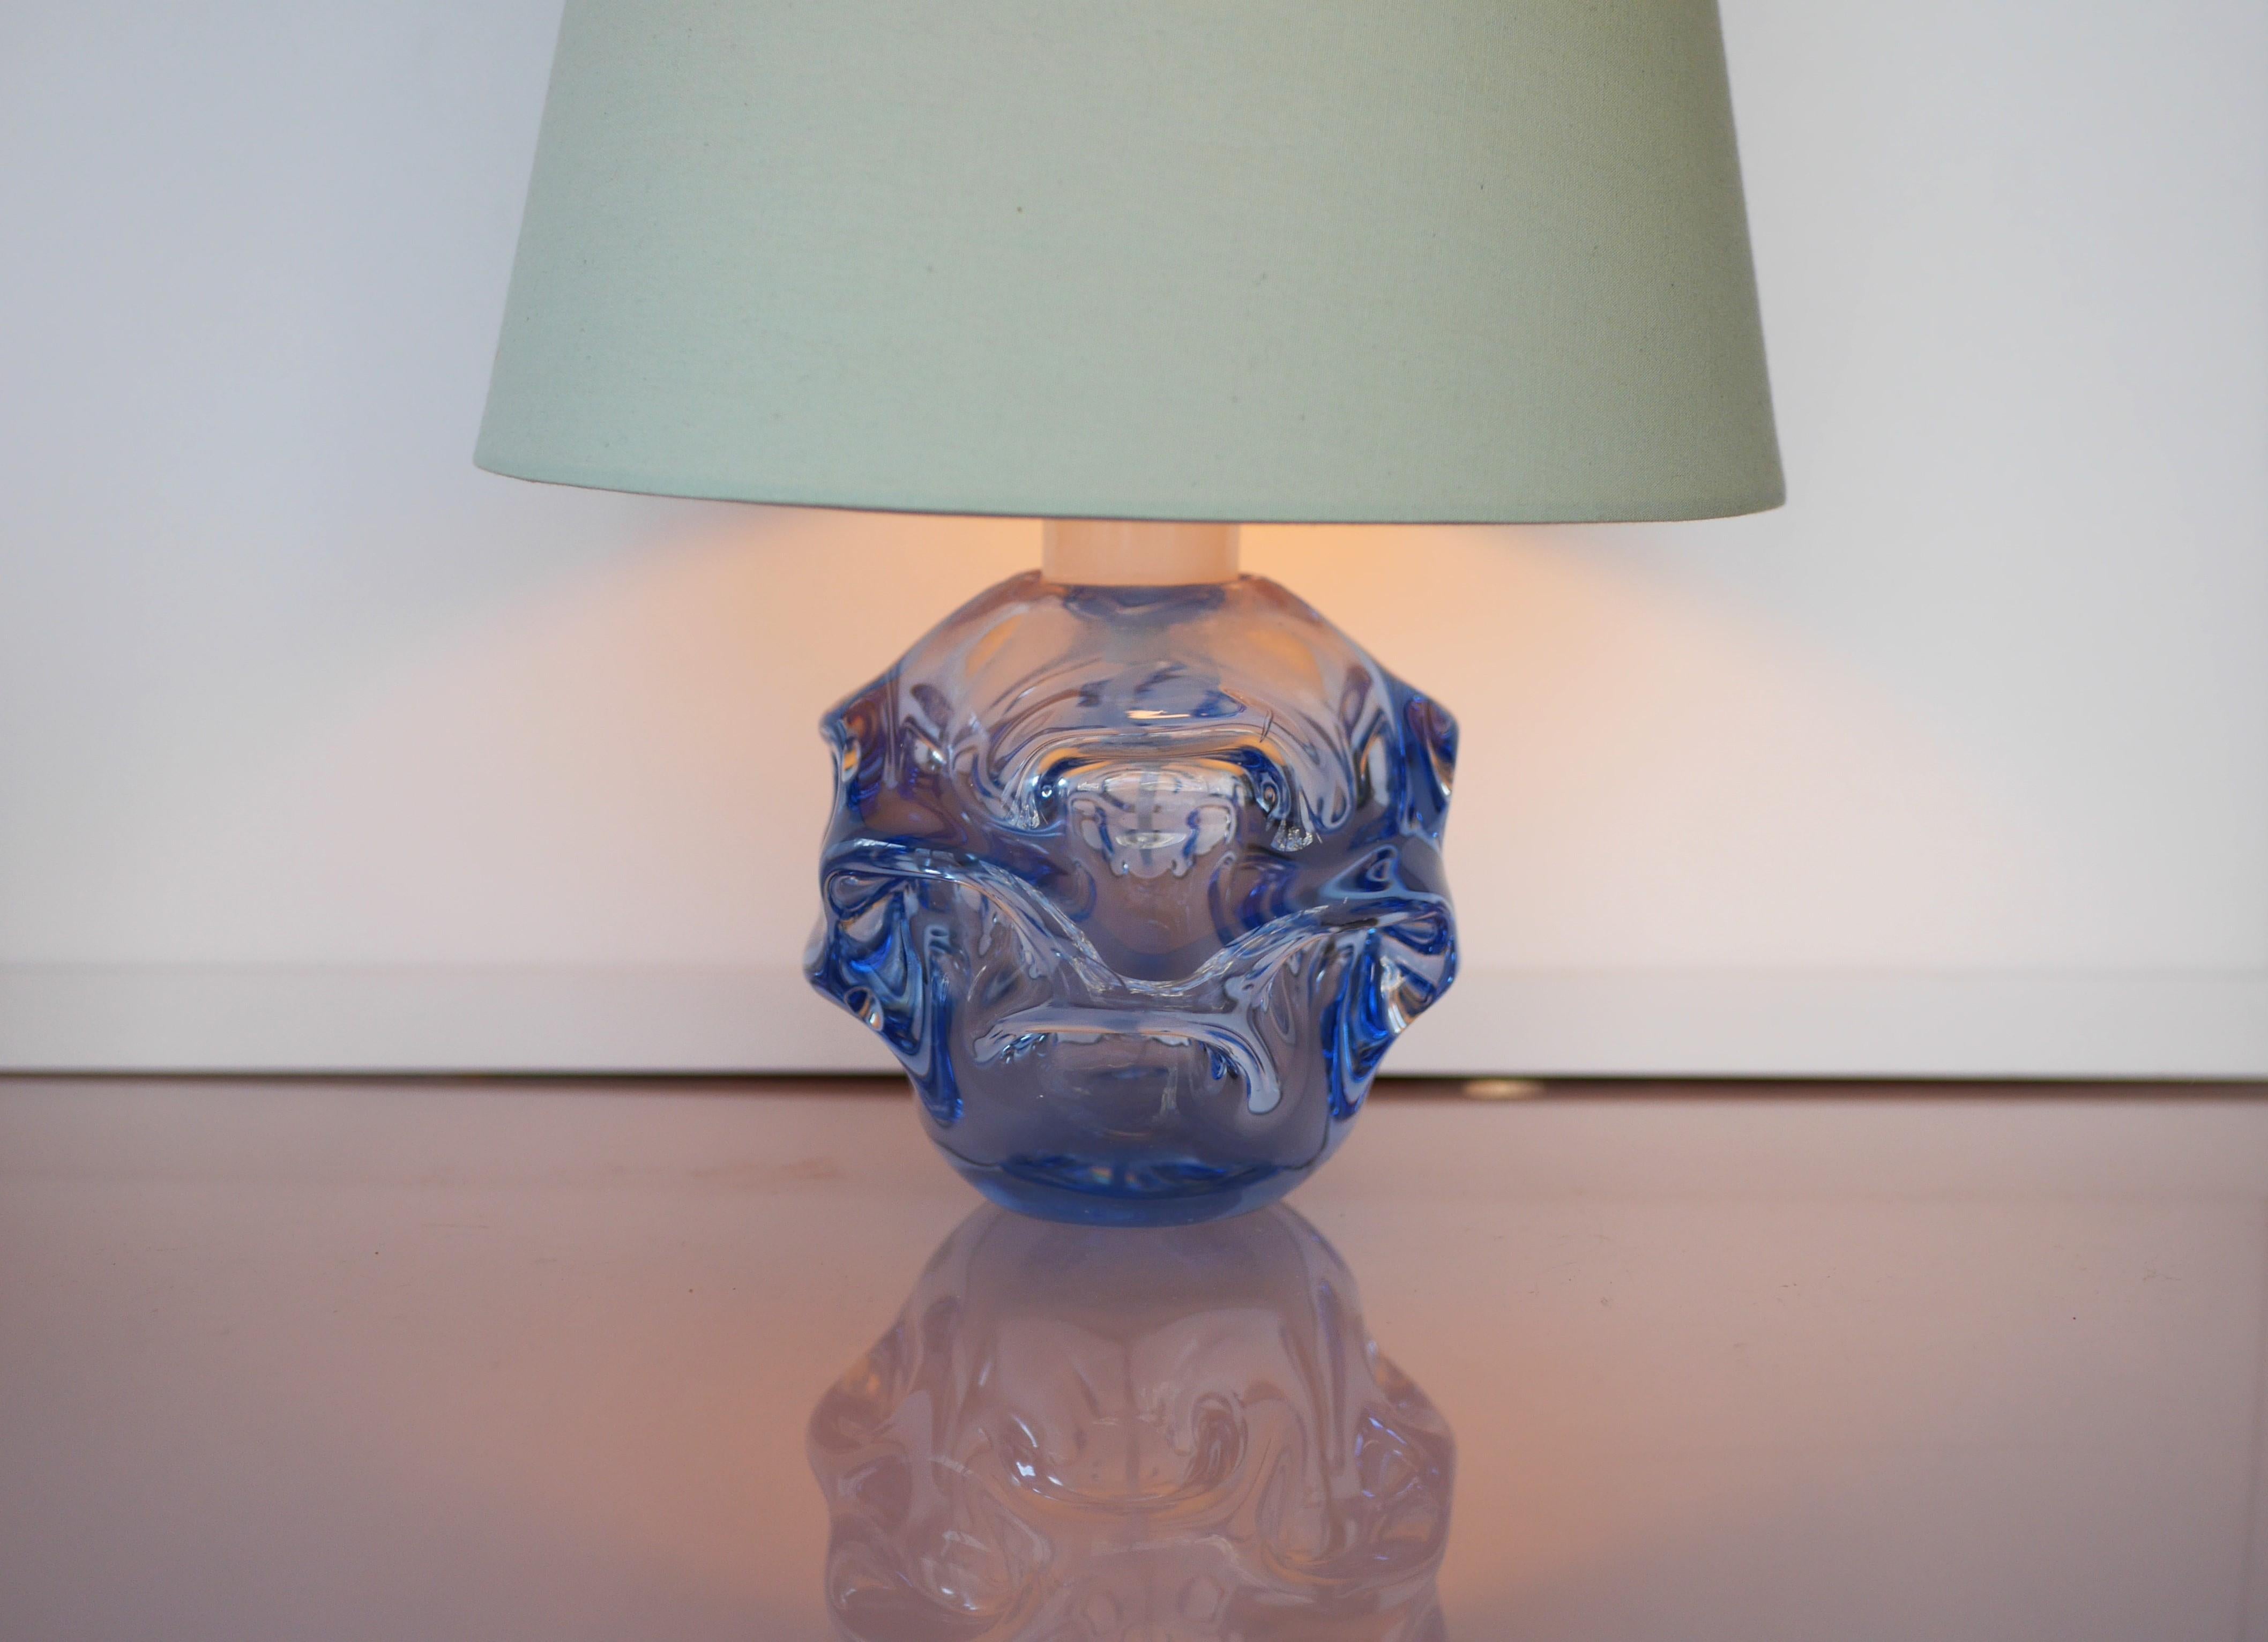 A stunning mid-century modern crystal lamp made by the talented Börne Augustsson for Åseda, Sweden during the 60s. The shape is very biomorphic and the color is equally amazing blue tone. This lamp is very special and will make a statement and add